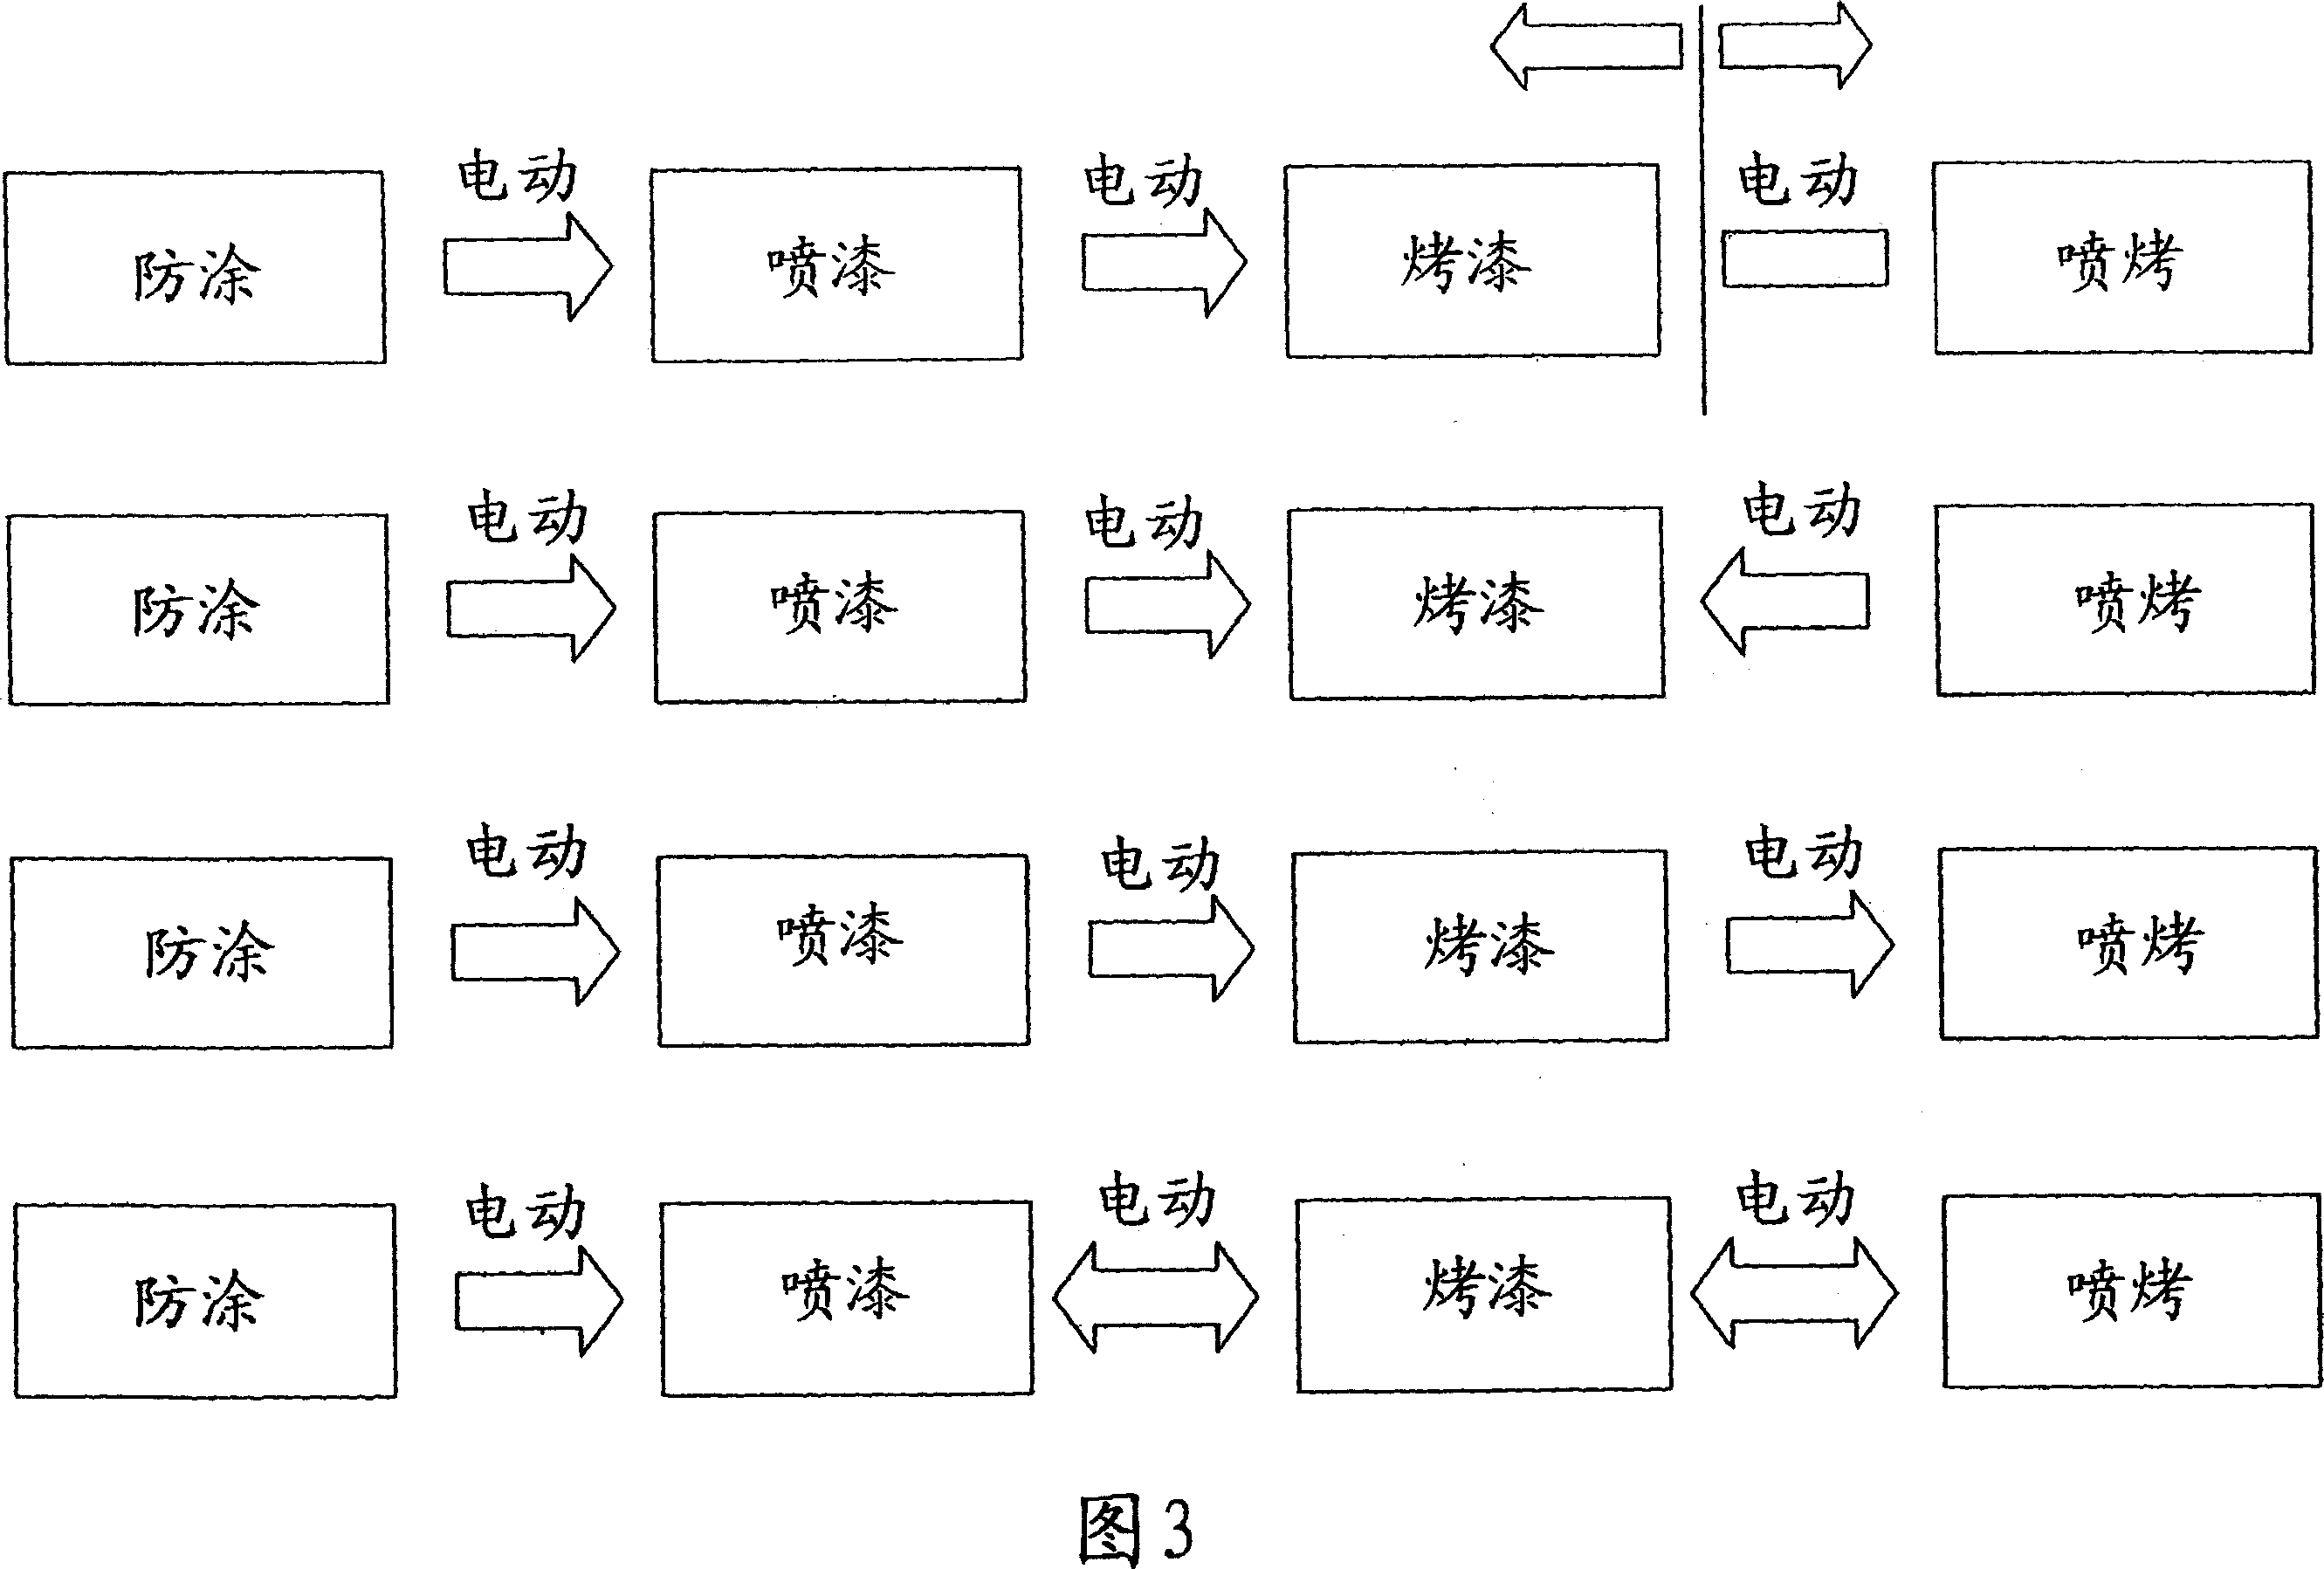 Method and device of automatic spray paint